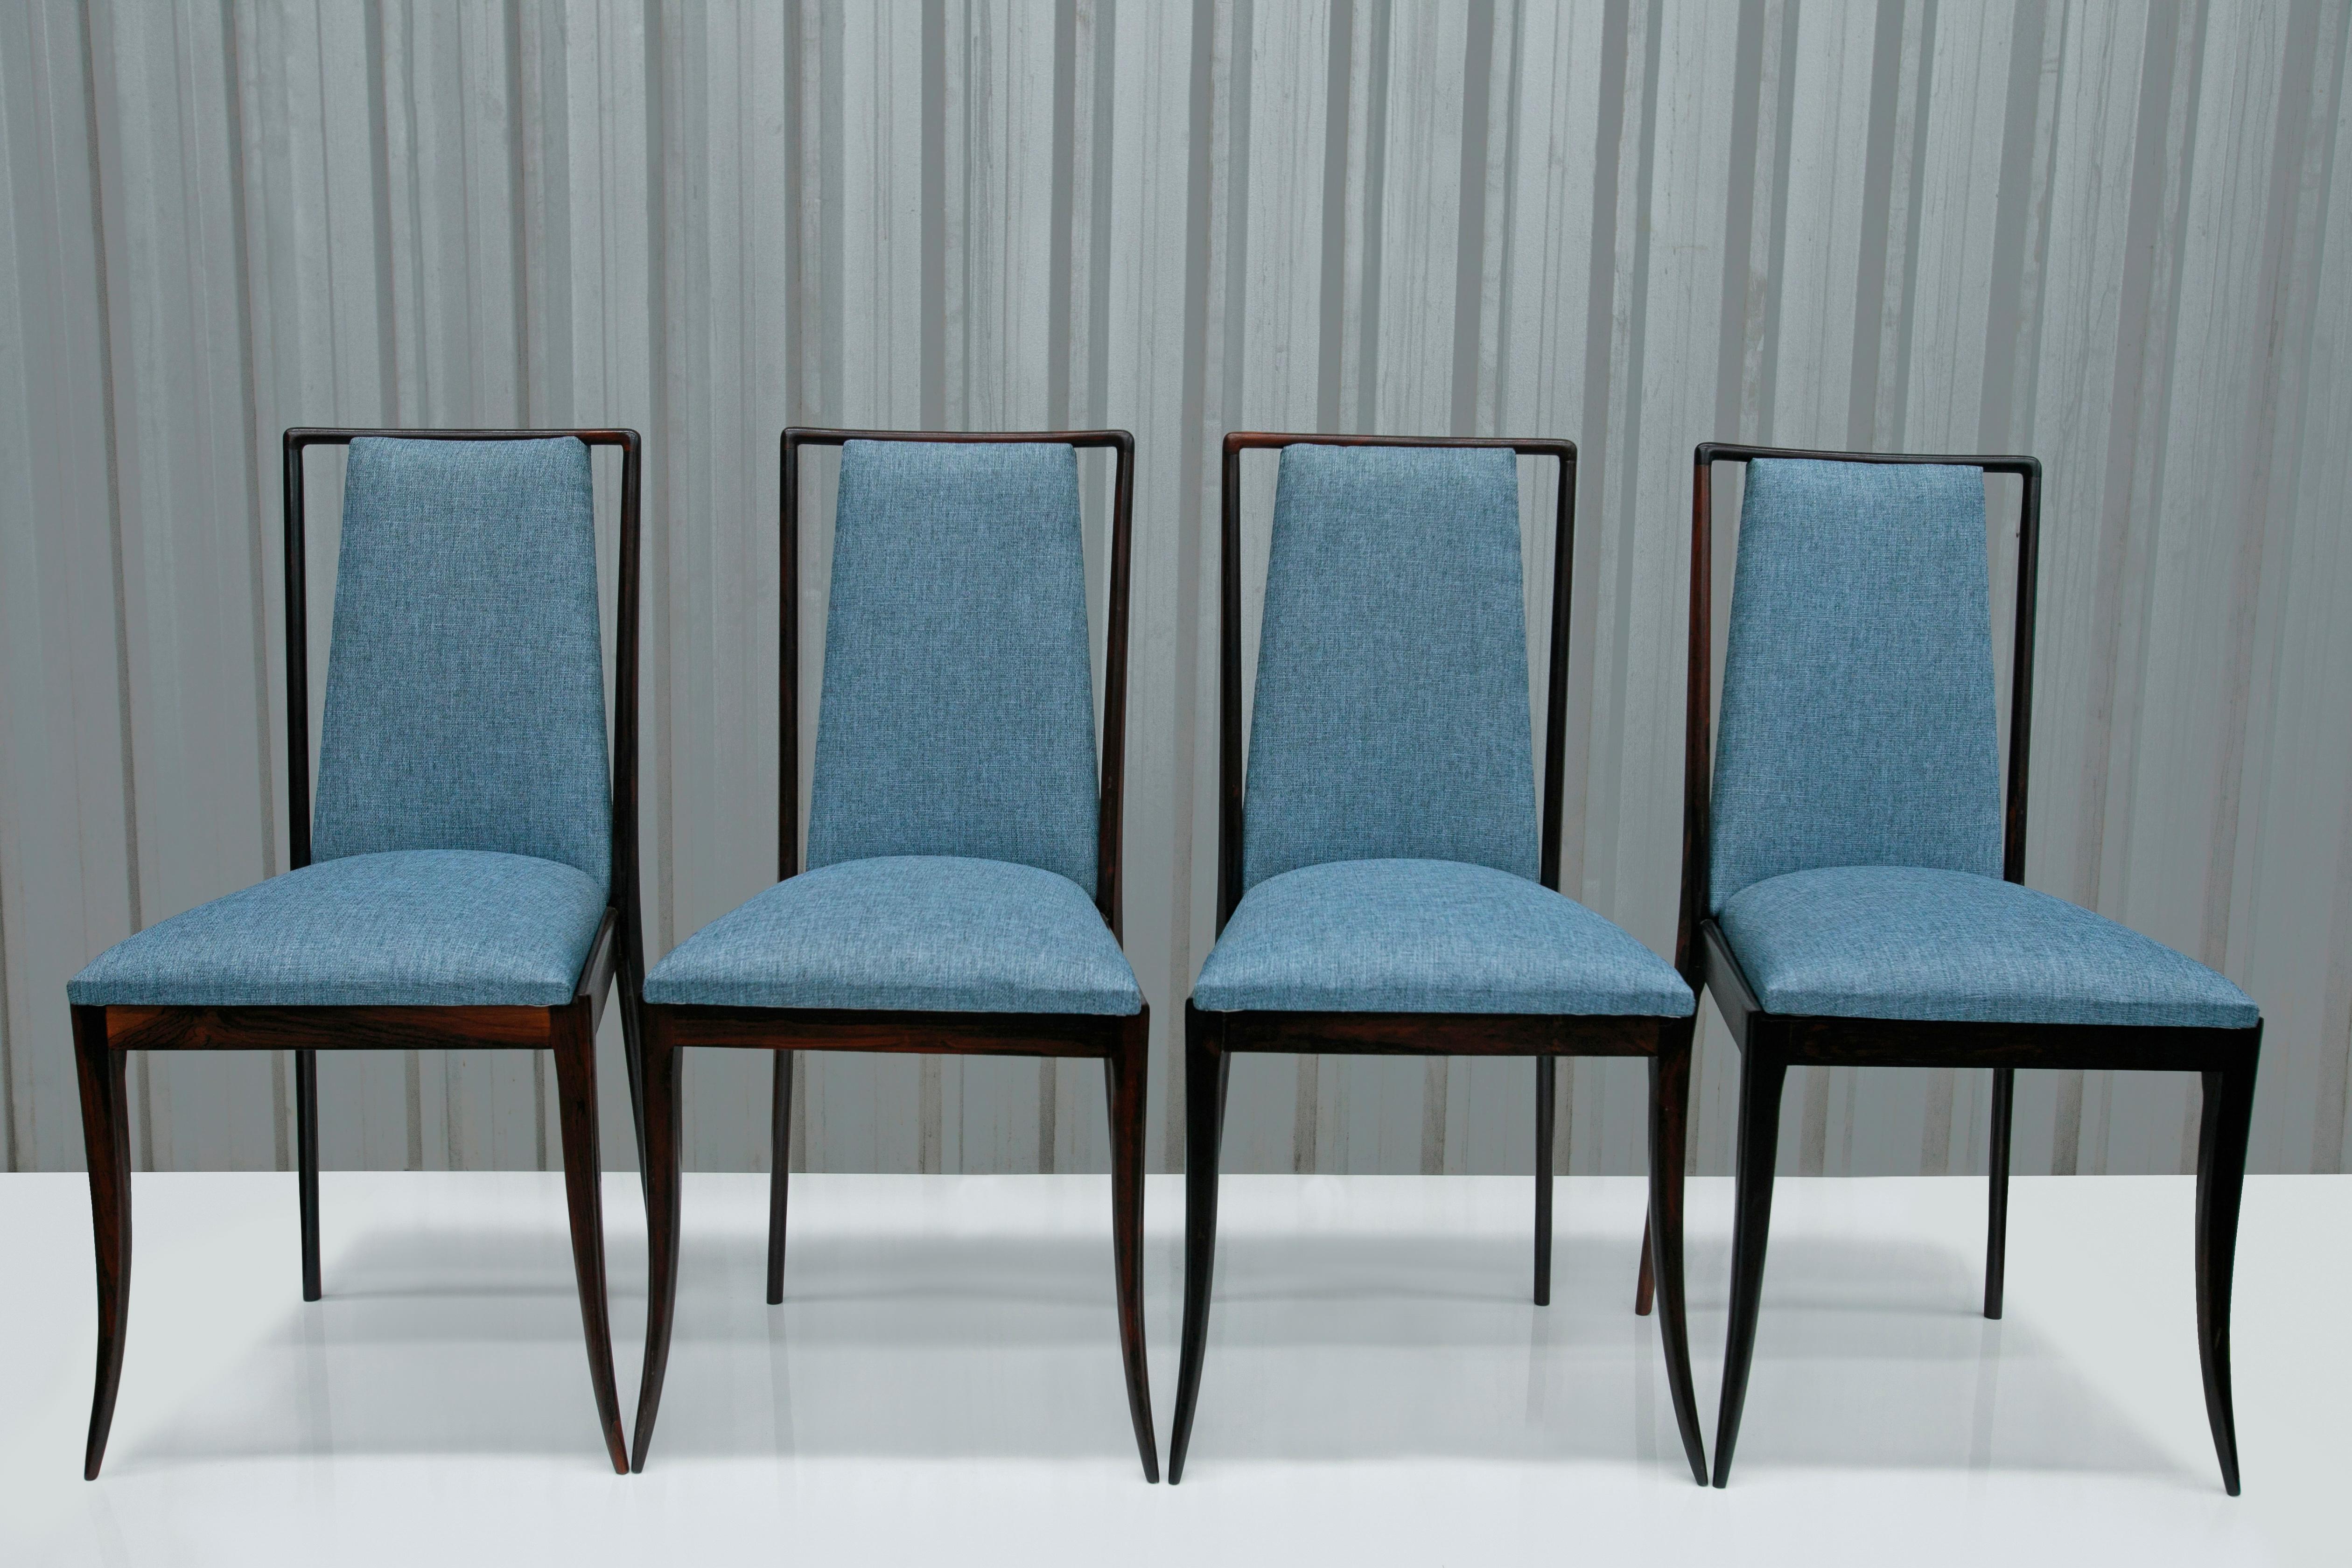 Available today, this sculptural Mid-Century Modern four chair set in hardwood & blue fabric, designed in the fifties in Brazil is nothing less than spectacular!

Each chair features a Brazilian rosewood (known as Jacaranda) structure with a tall